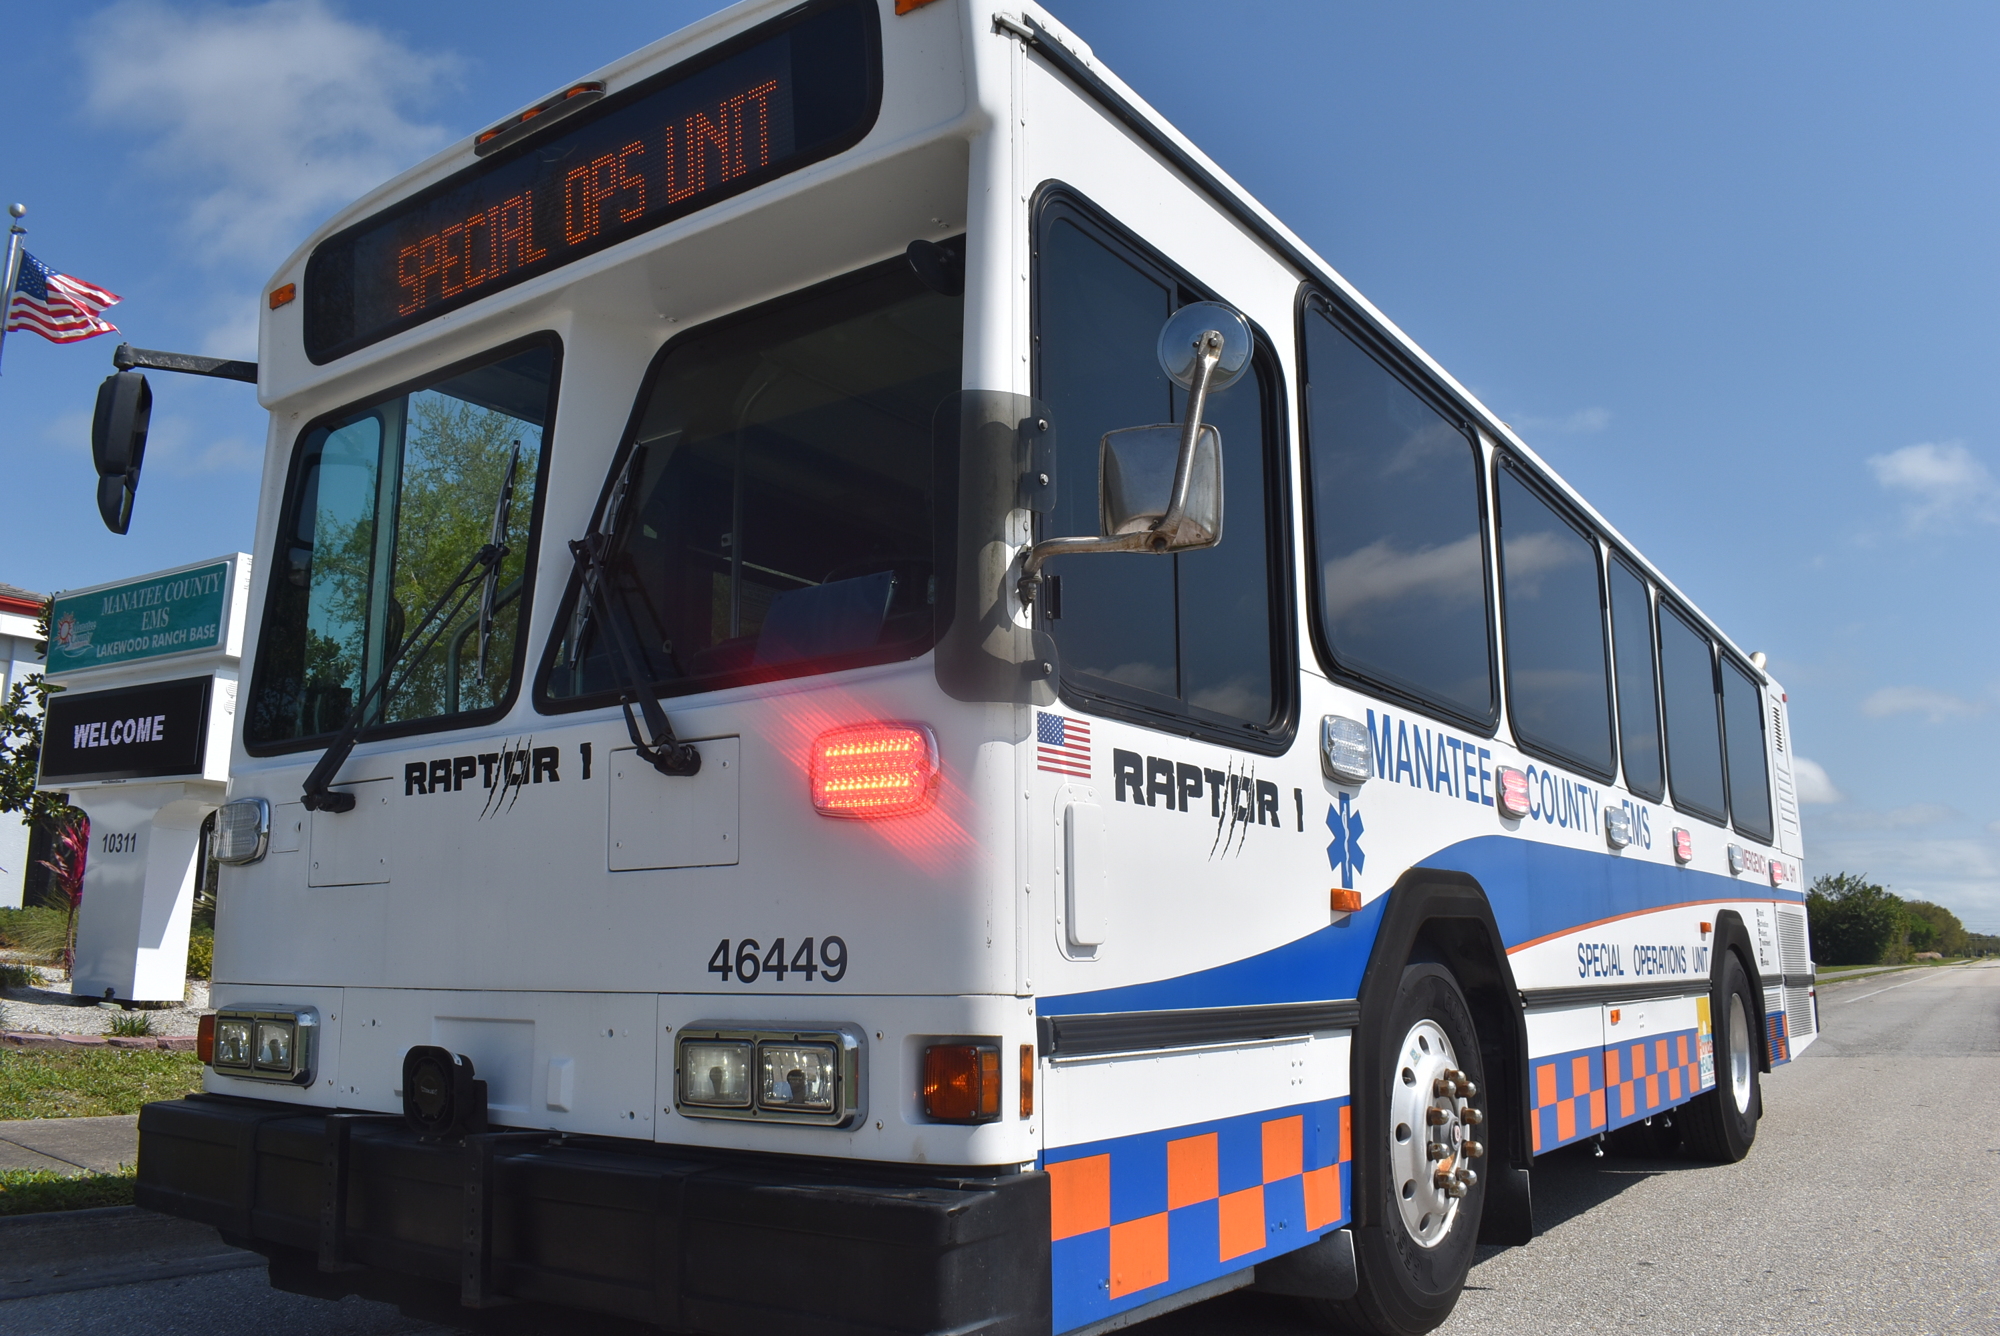 The RAPTOR 1 is a converted Manatee County Area Transit bus now used by Emergency Medical Services as an ambubus. It has logged nearly 500,000 miles between the roles, which is why the county is designing a new ambubus.